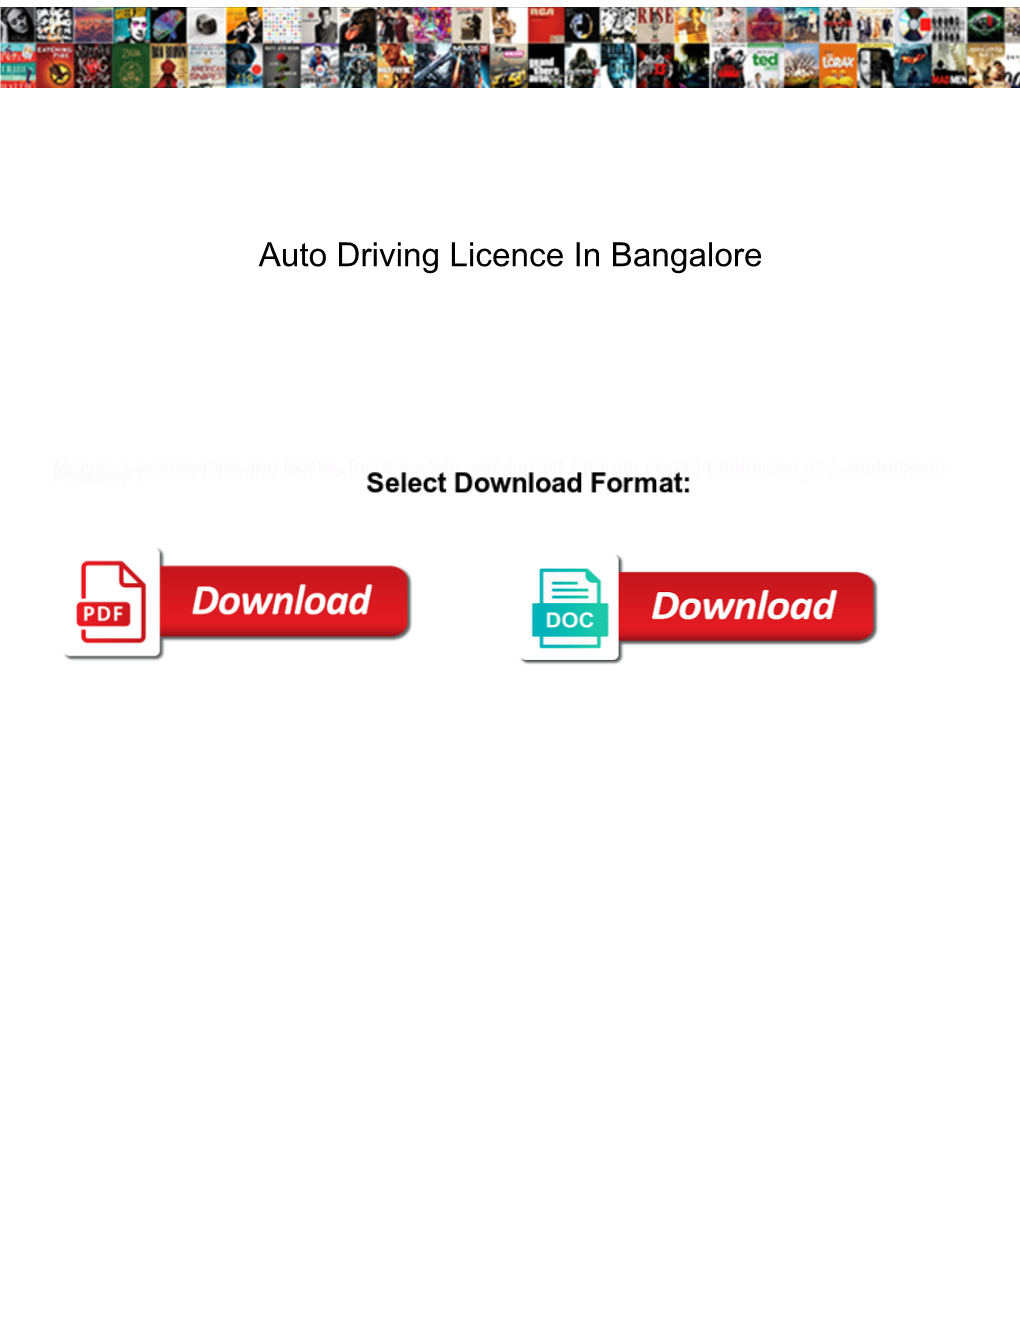 Auto Driving Licence in Bangalore